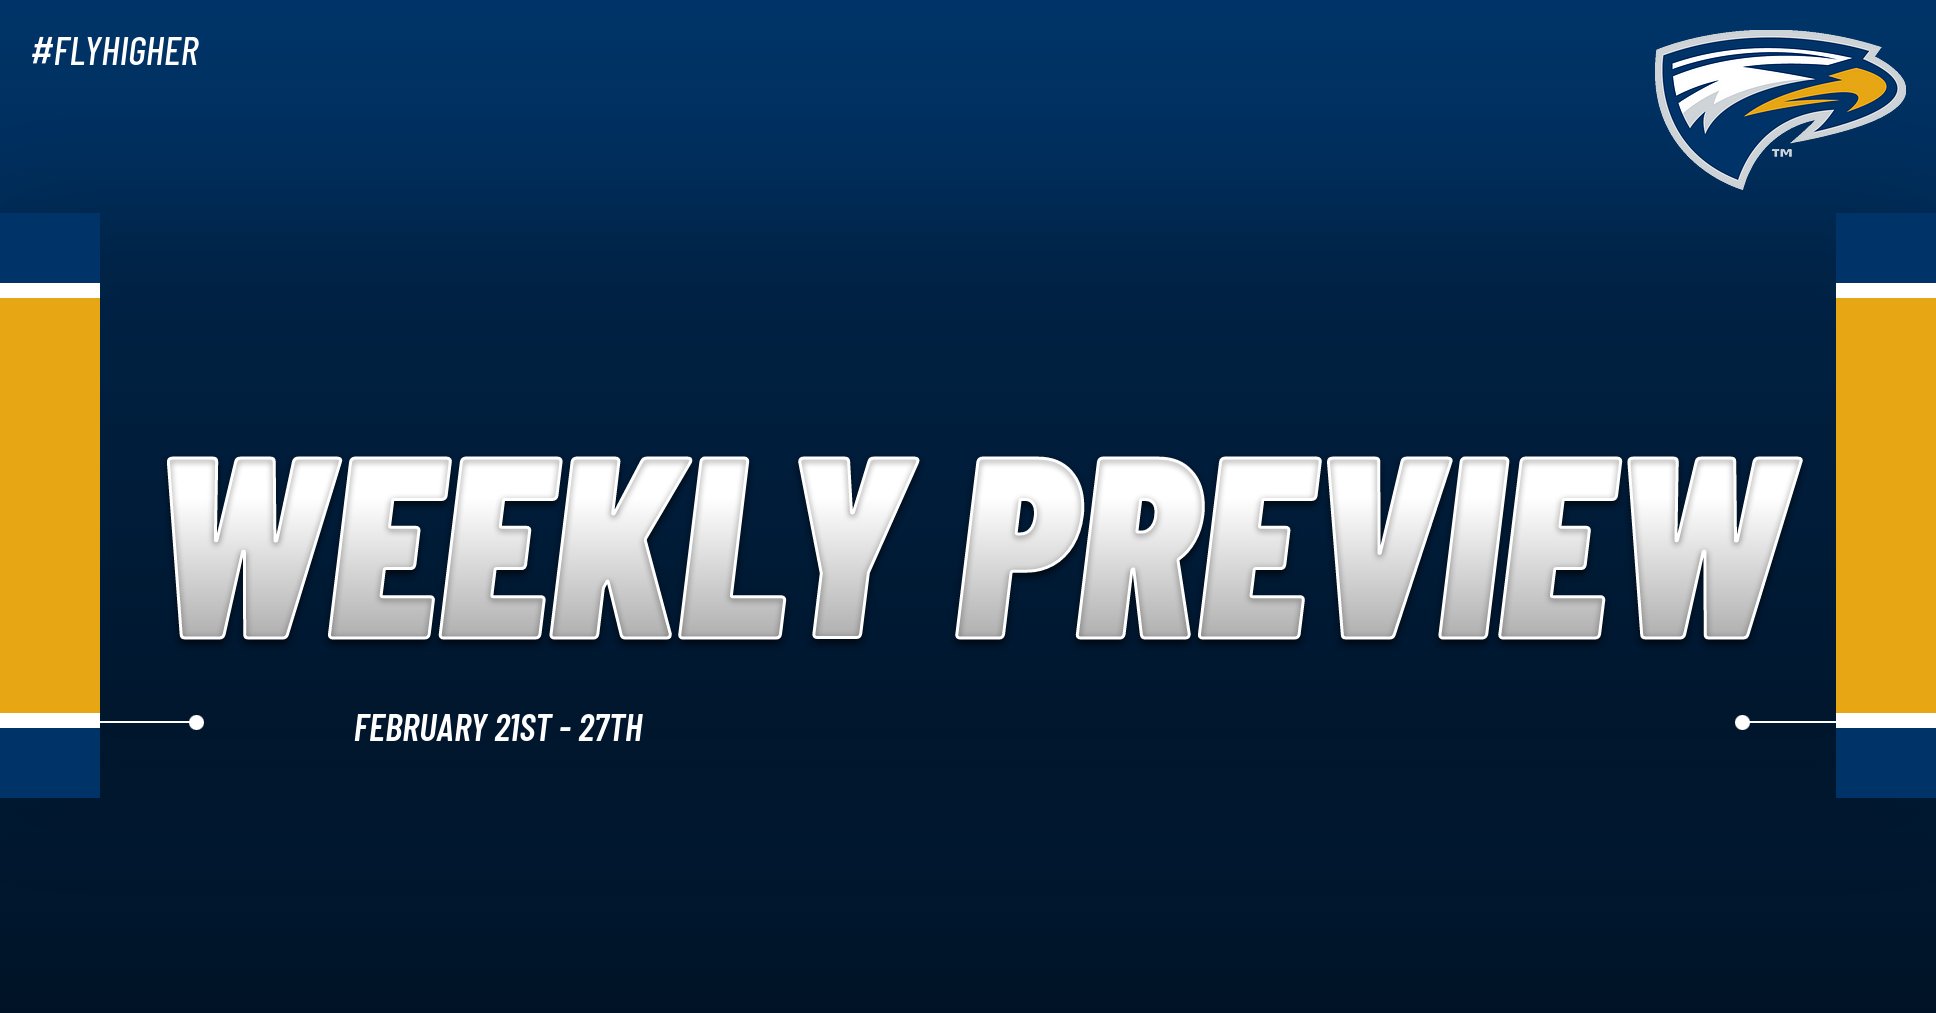 Emory Athletics Weekly Preview - February 21st - 27th